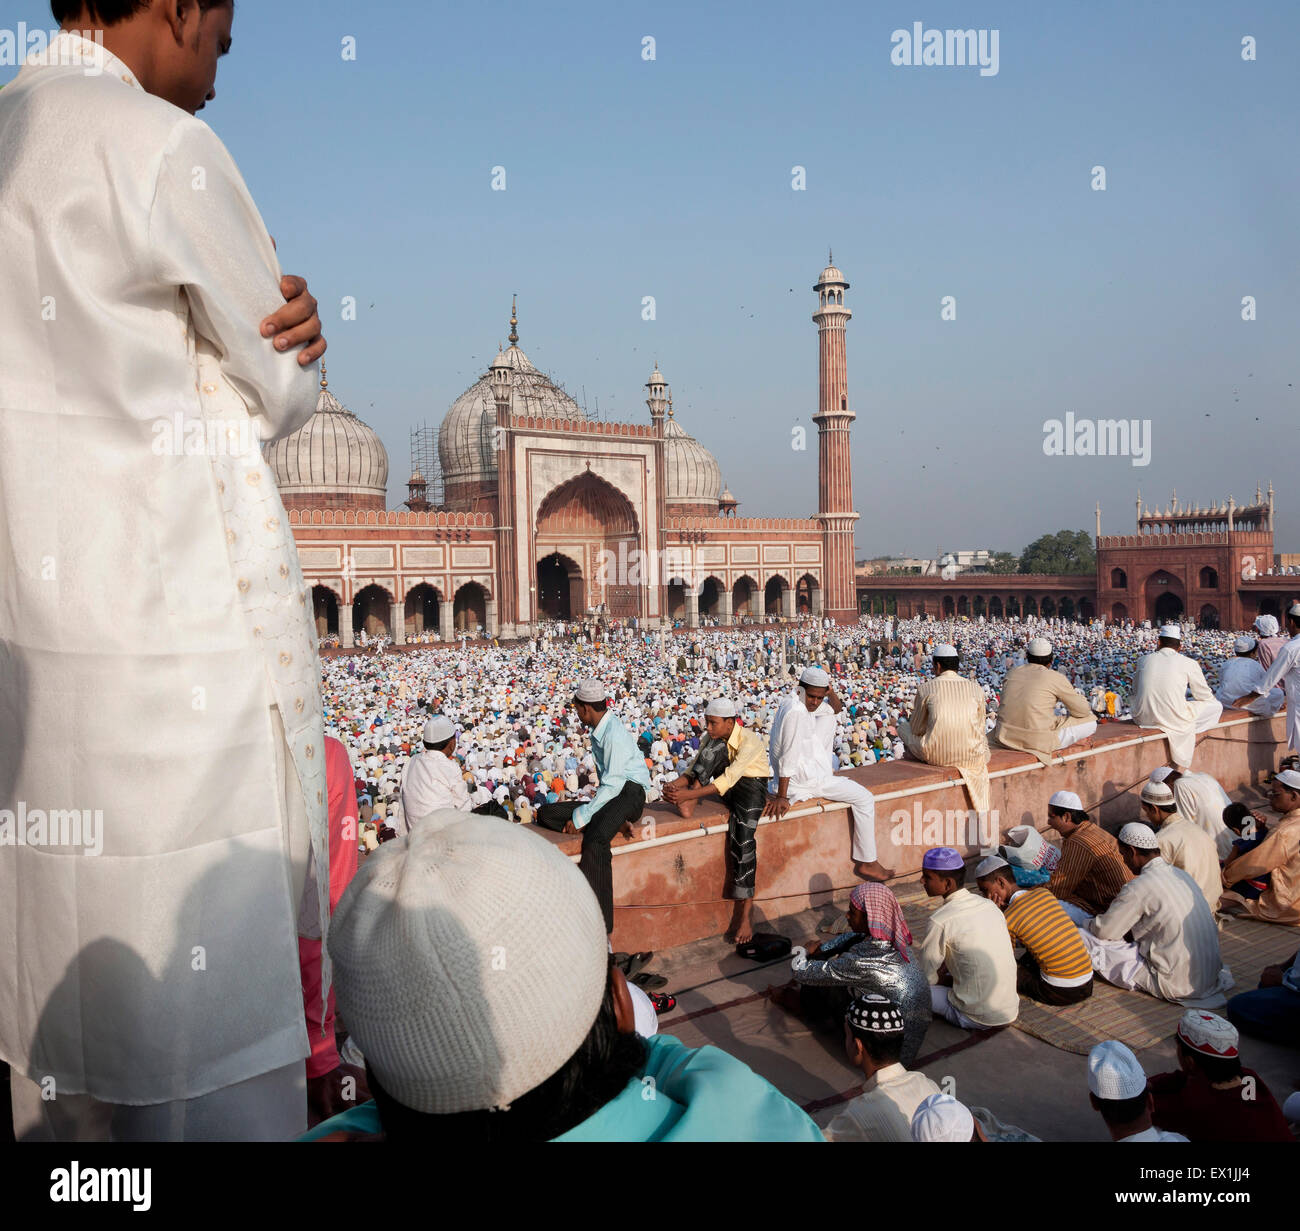 Festival of Eid-ul-fitr being celebrated at the Jama Masjid mosque in old Delhi, India. Stock Photo